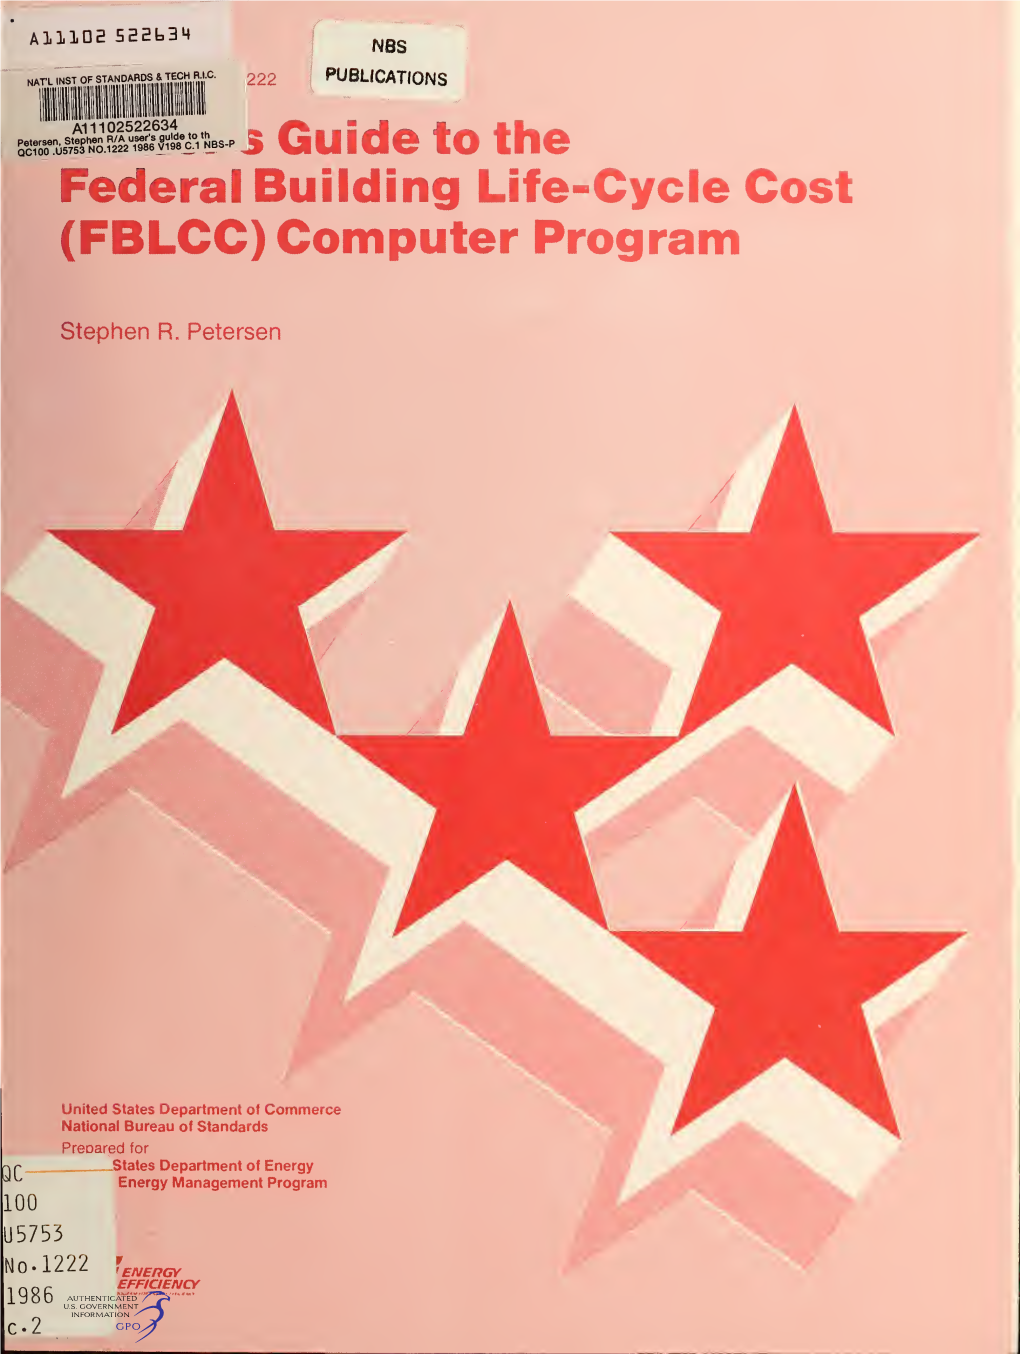 A User's Guide to the Federal Building Life-Cycle Cost